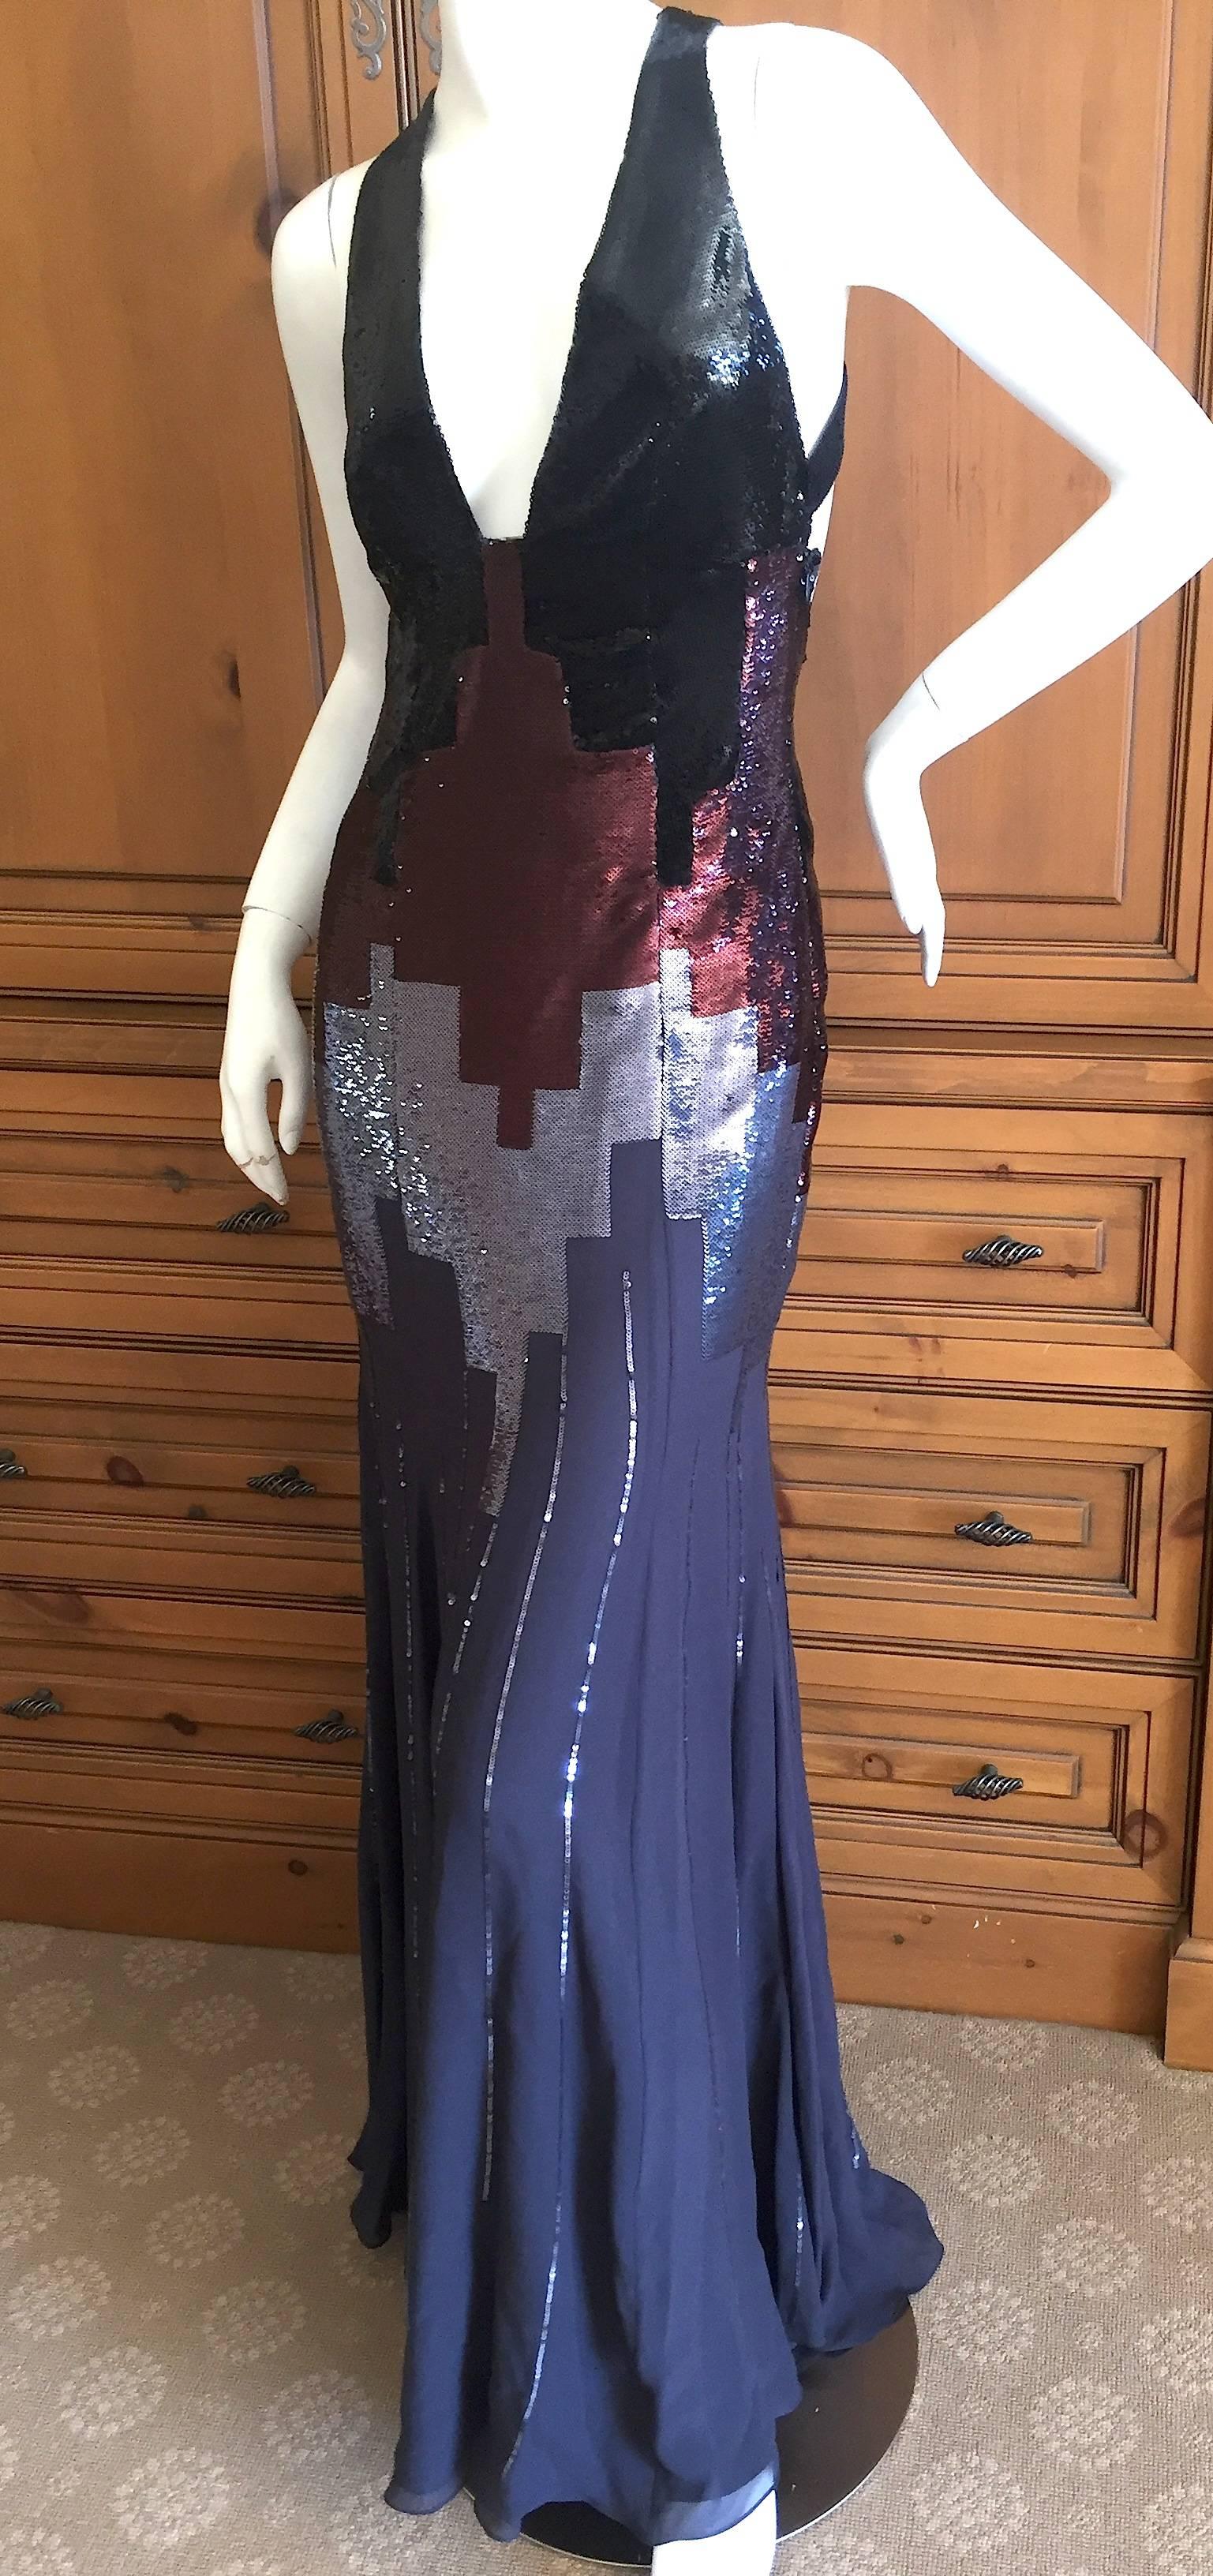 Versace Sequin Evening Dress with Deco Cityscape Design For Sale 1